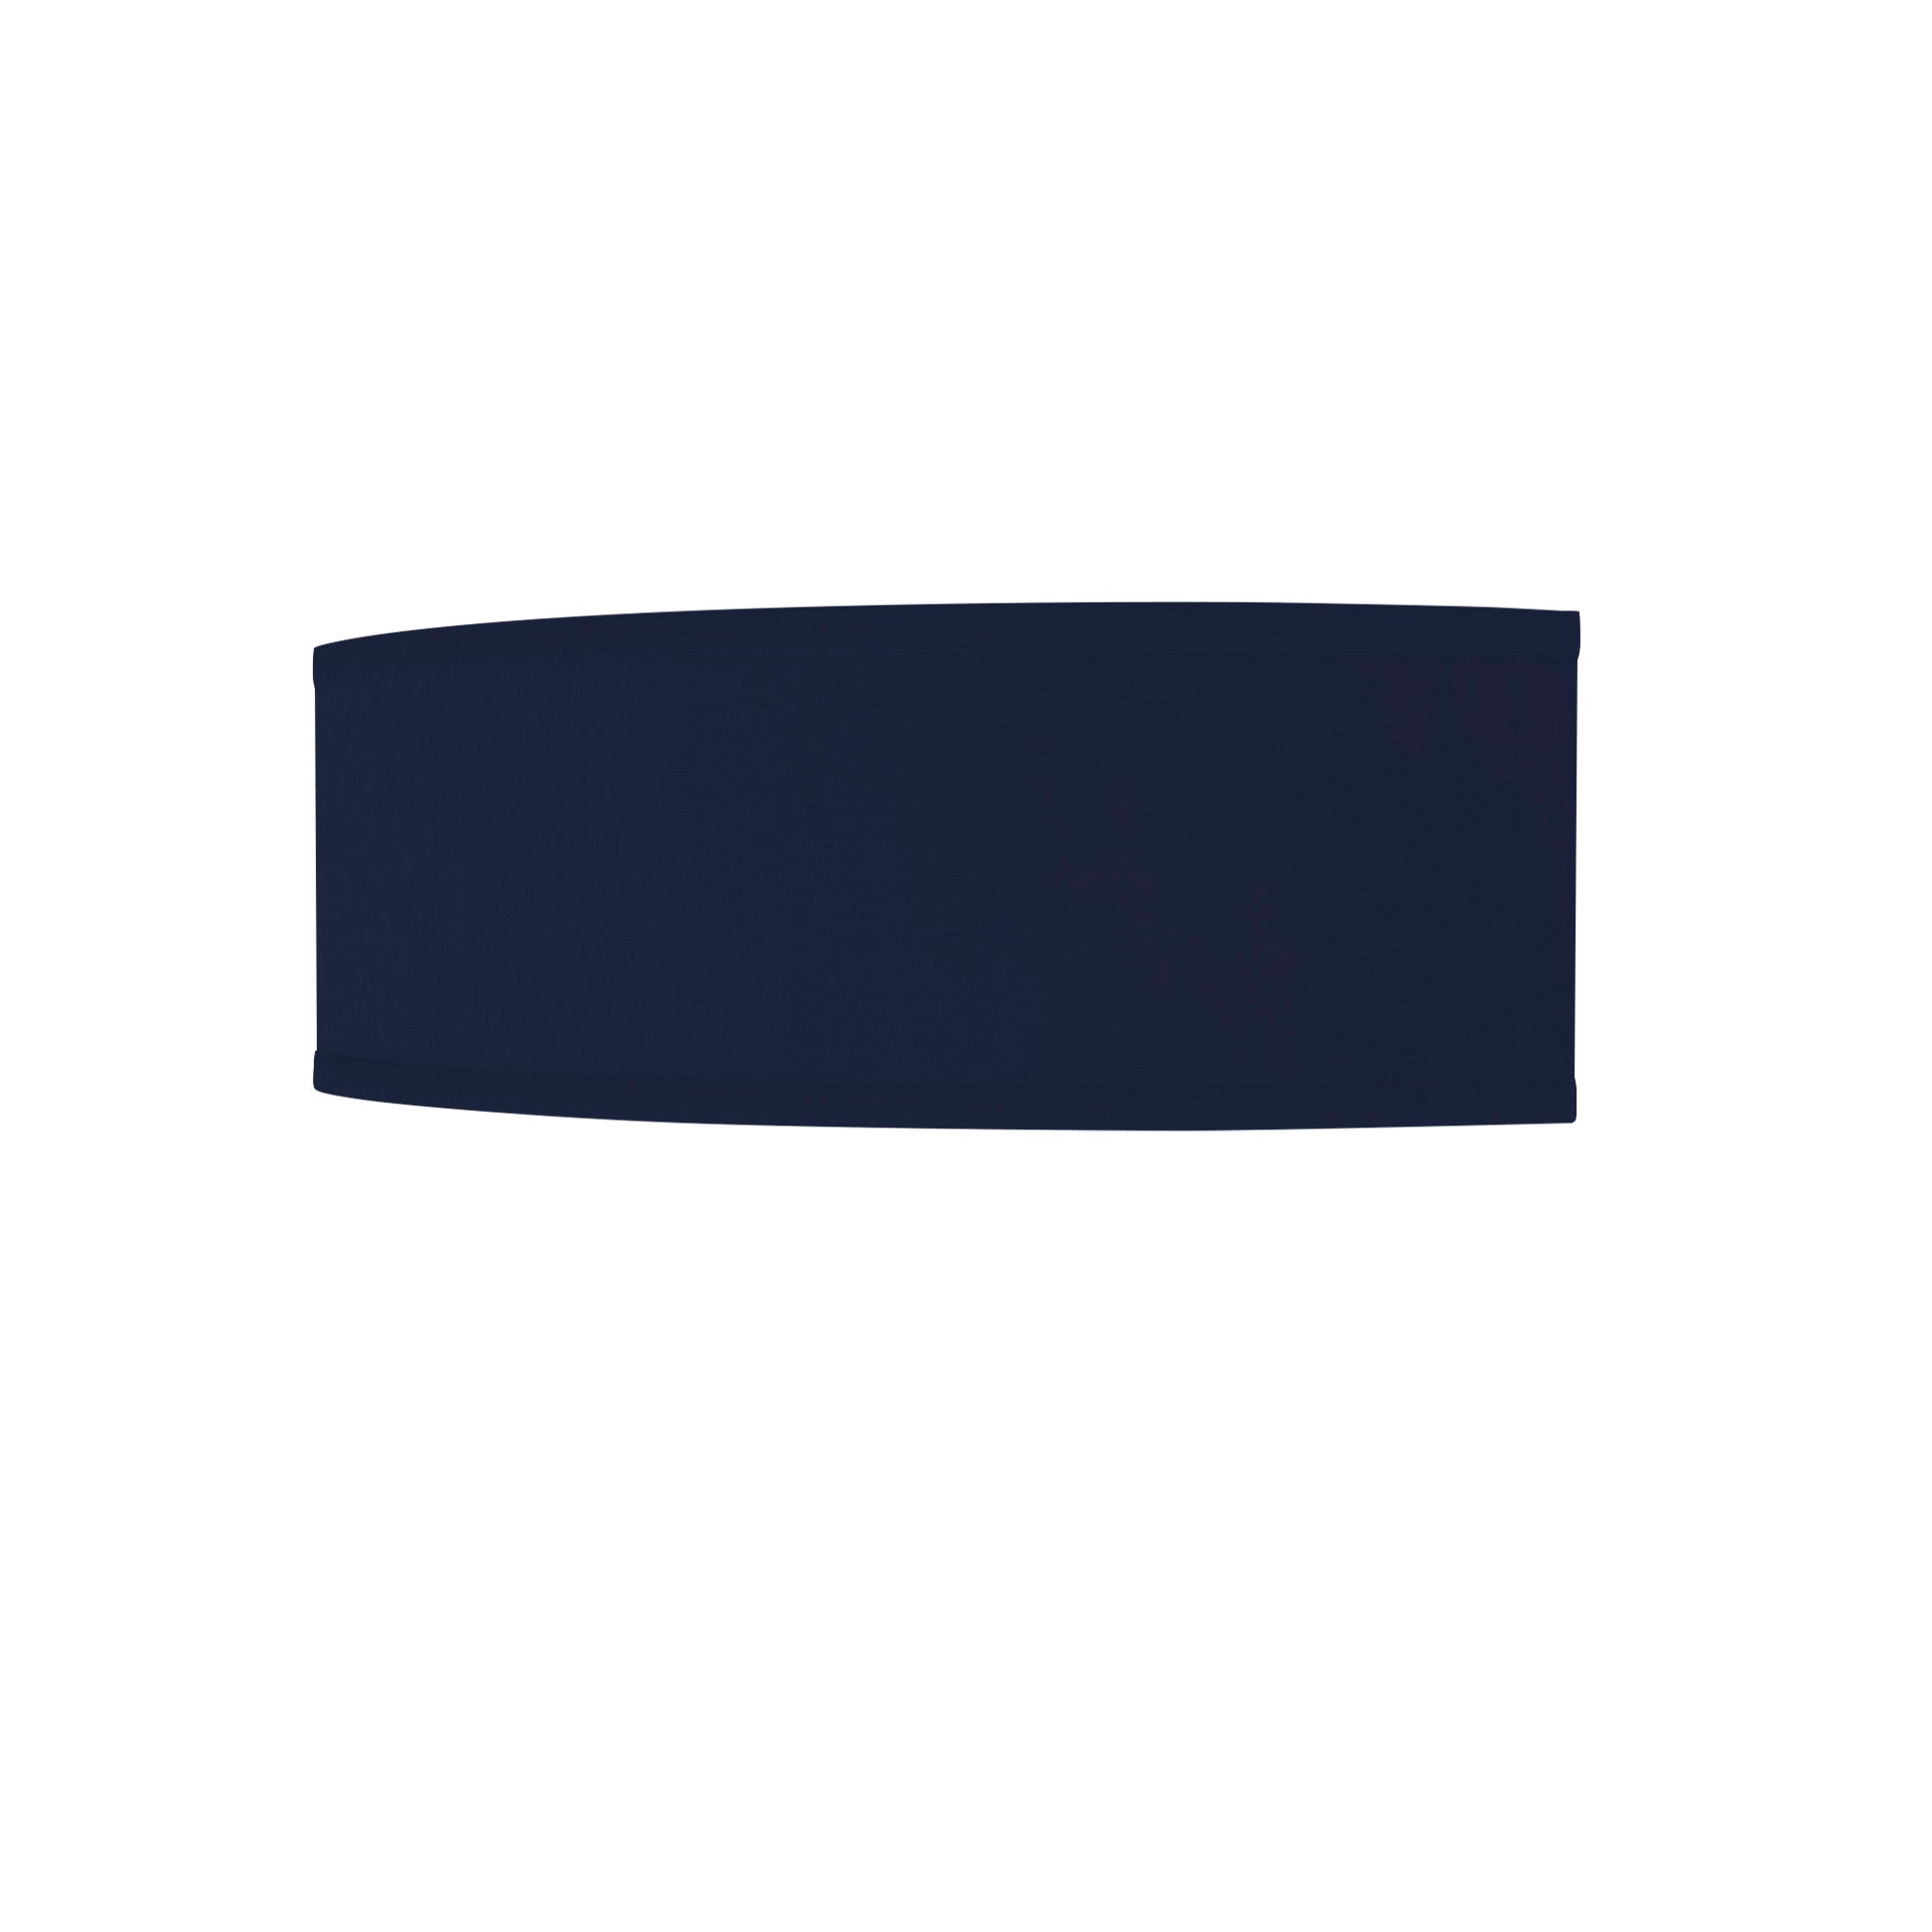 The Mora Wall Sconce from Seascape Fixtures with a linen shade in navy color.